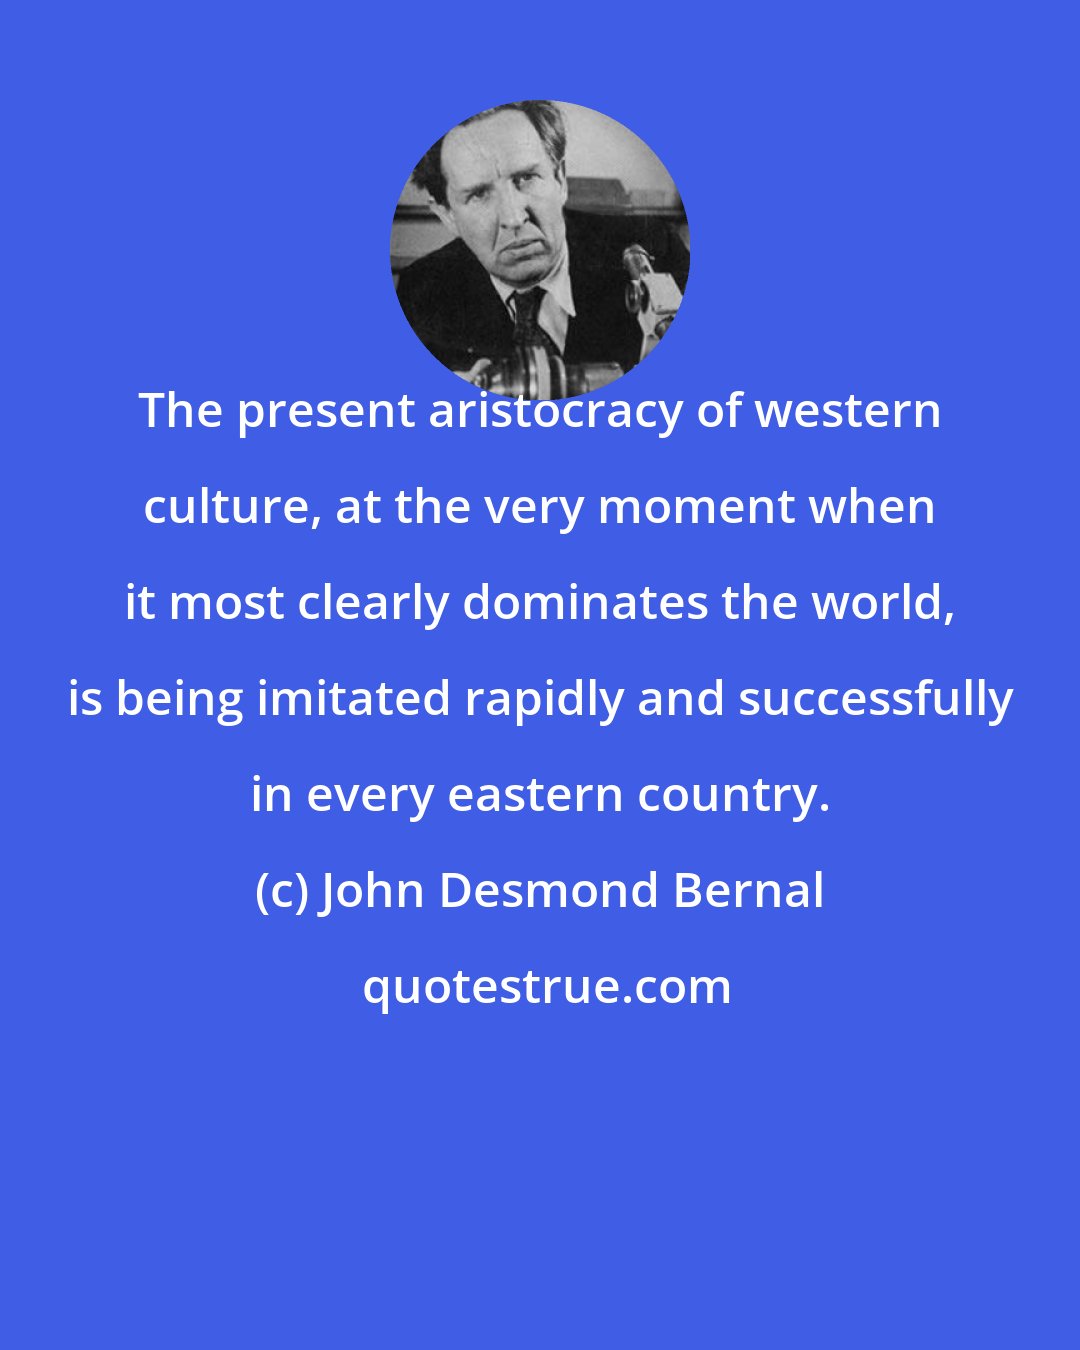 John Desmond Bernal: The present aristocracy of western culture, at the very moment when it most clearly dominates the world, is being imitated rapidly and successfully in every eastern country.